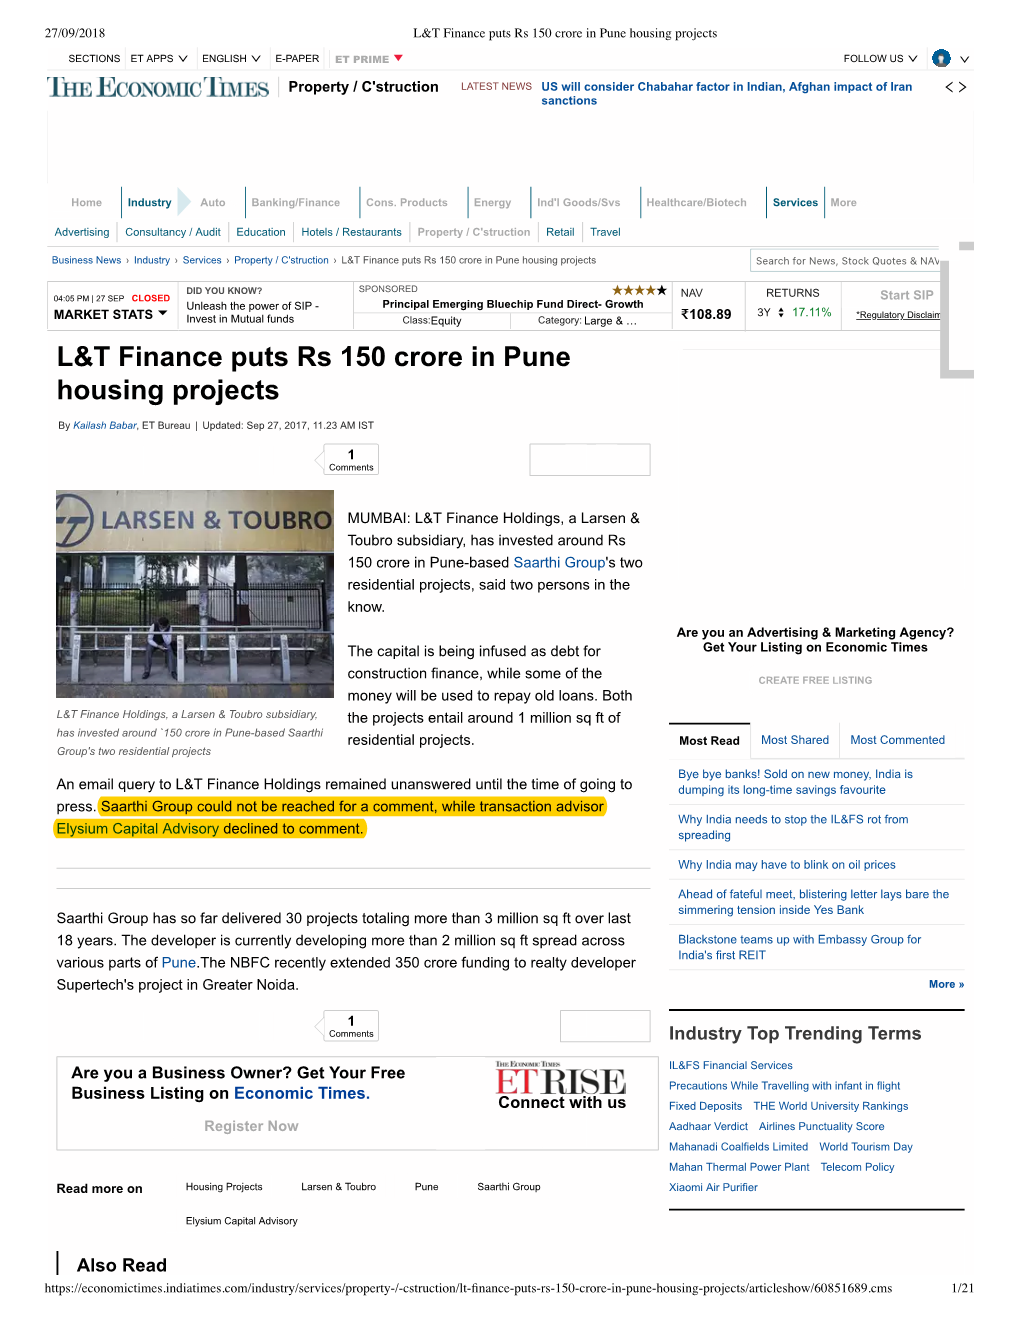 L&T Finance Puts Rs 150 Crore in Pune Housing Projects